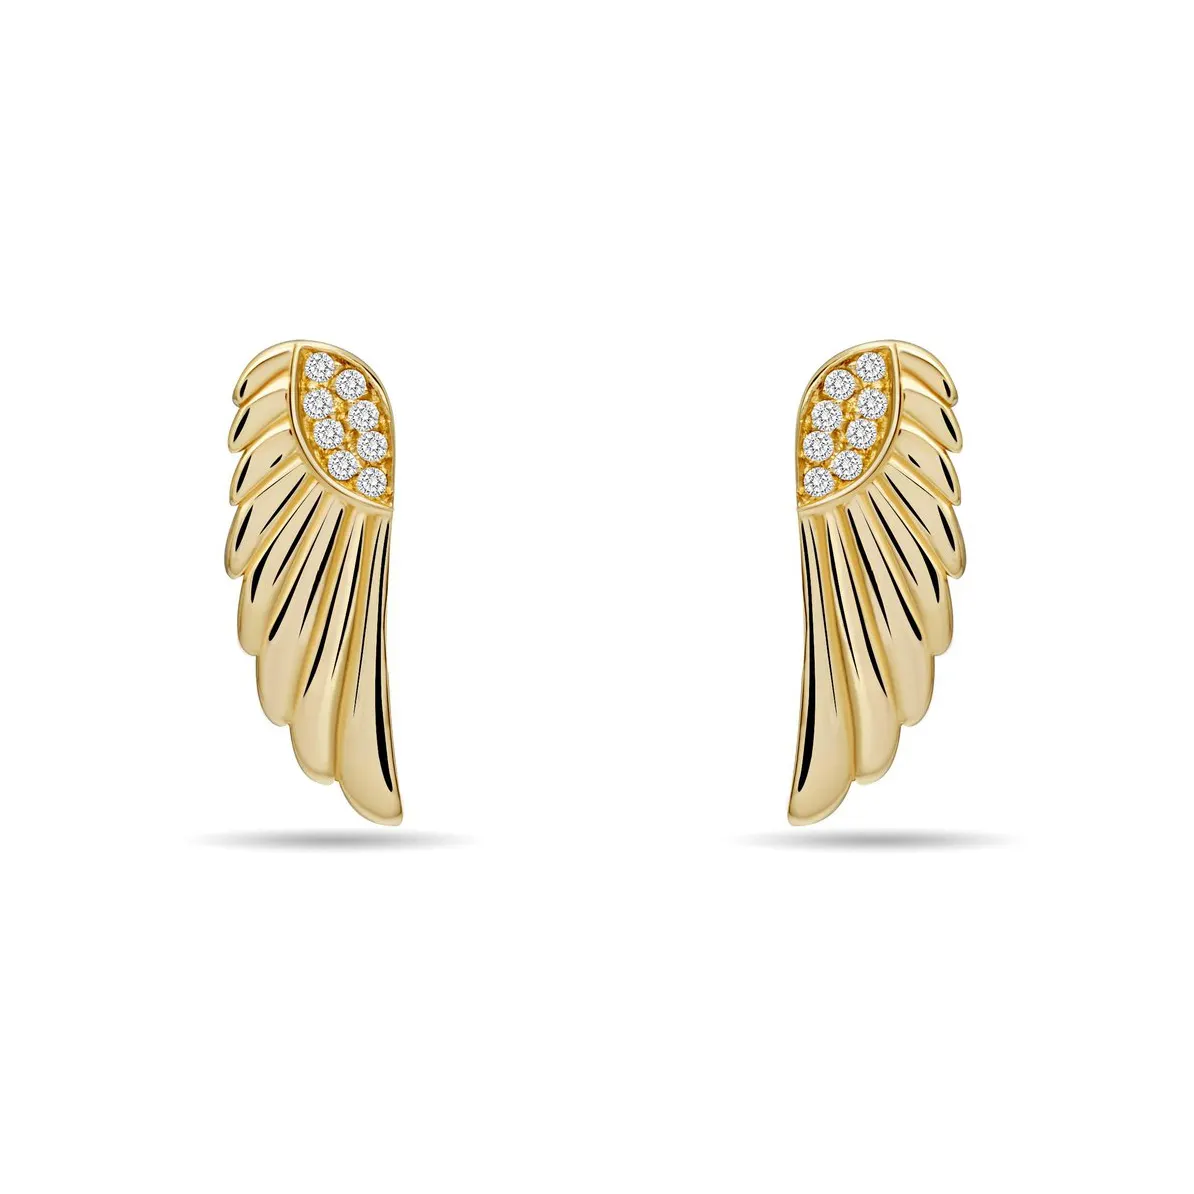 Gemnel High Quality Luxury Wedding Unique Cubic Zirconia Feather wings Stud Earrings For Women